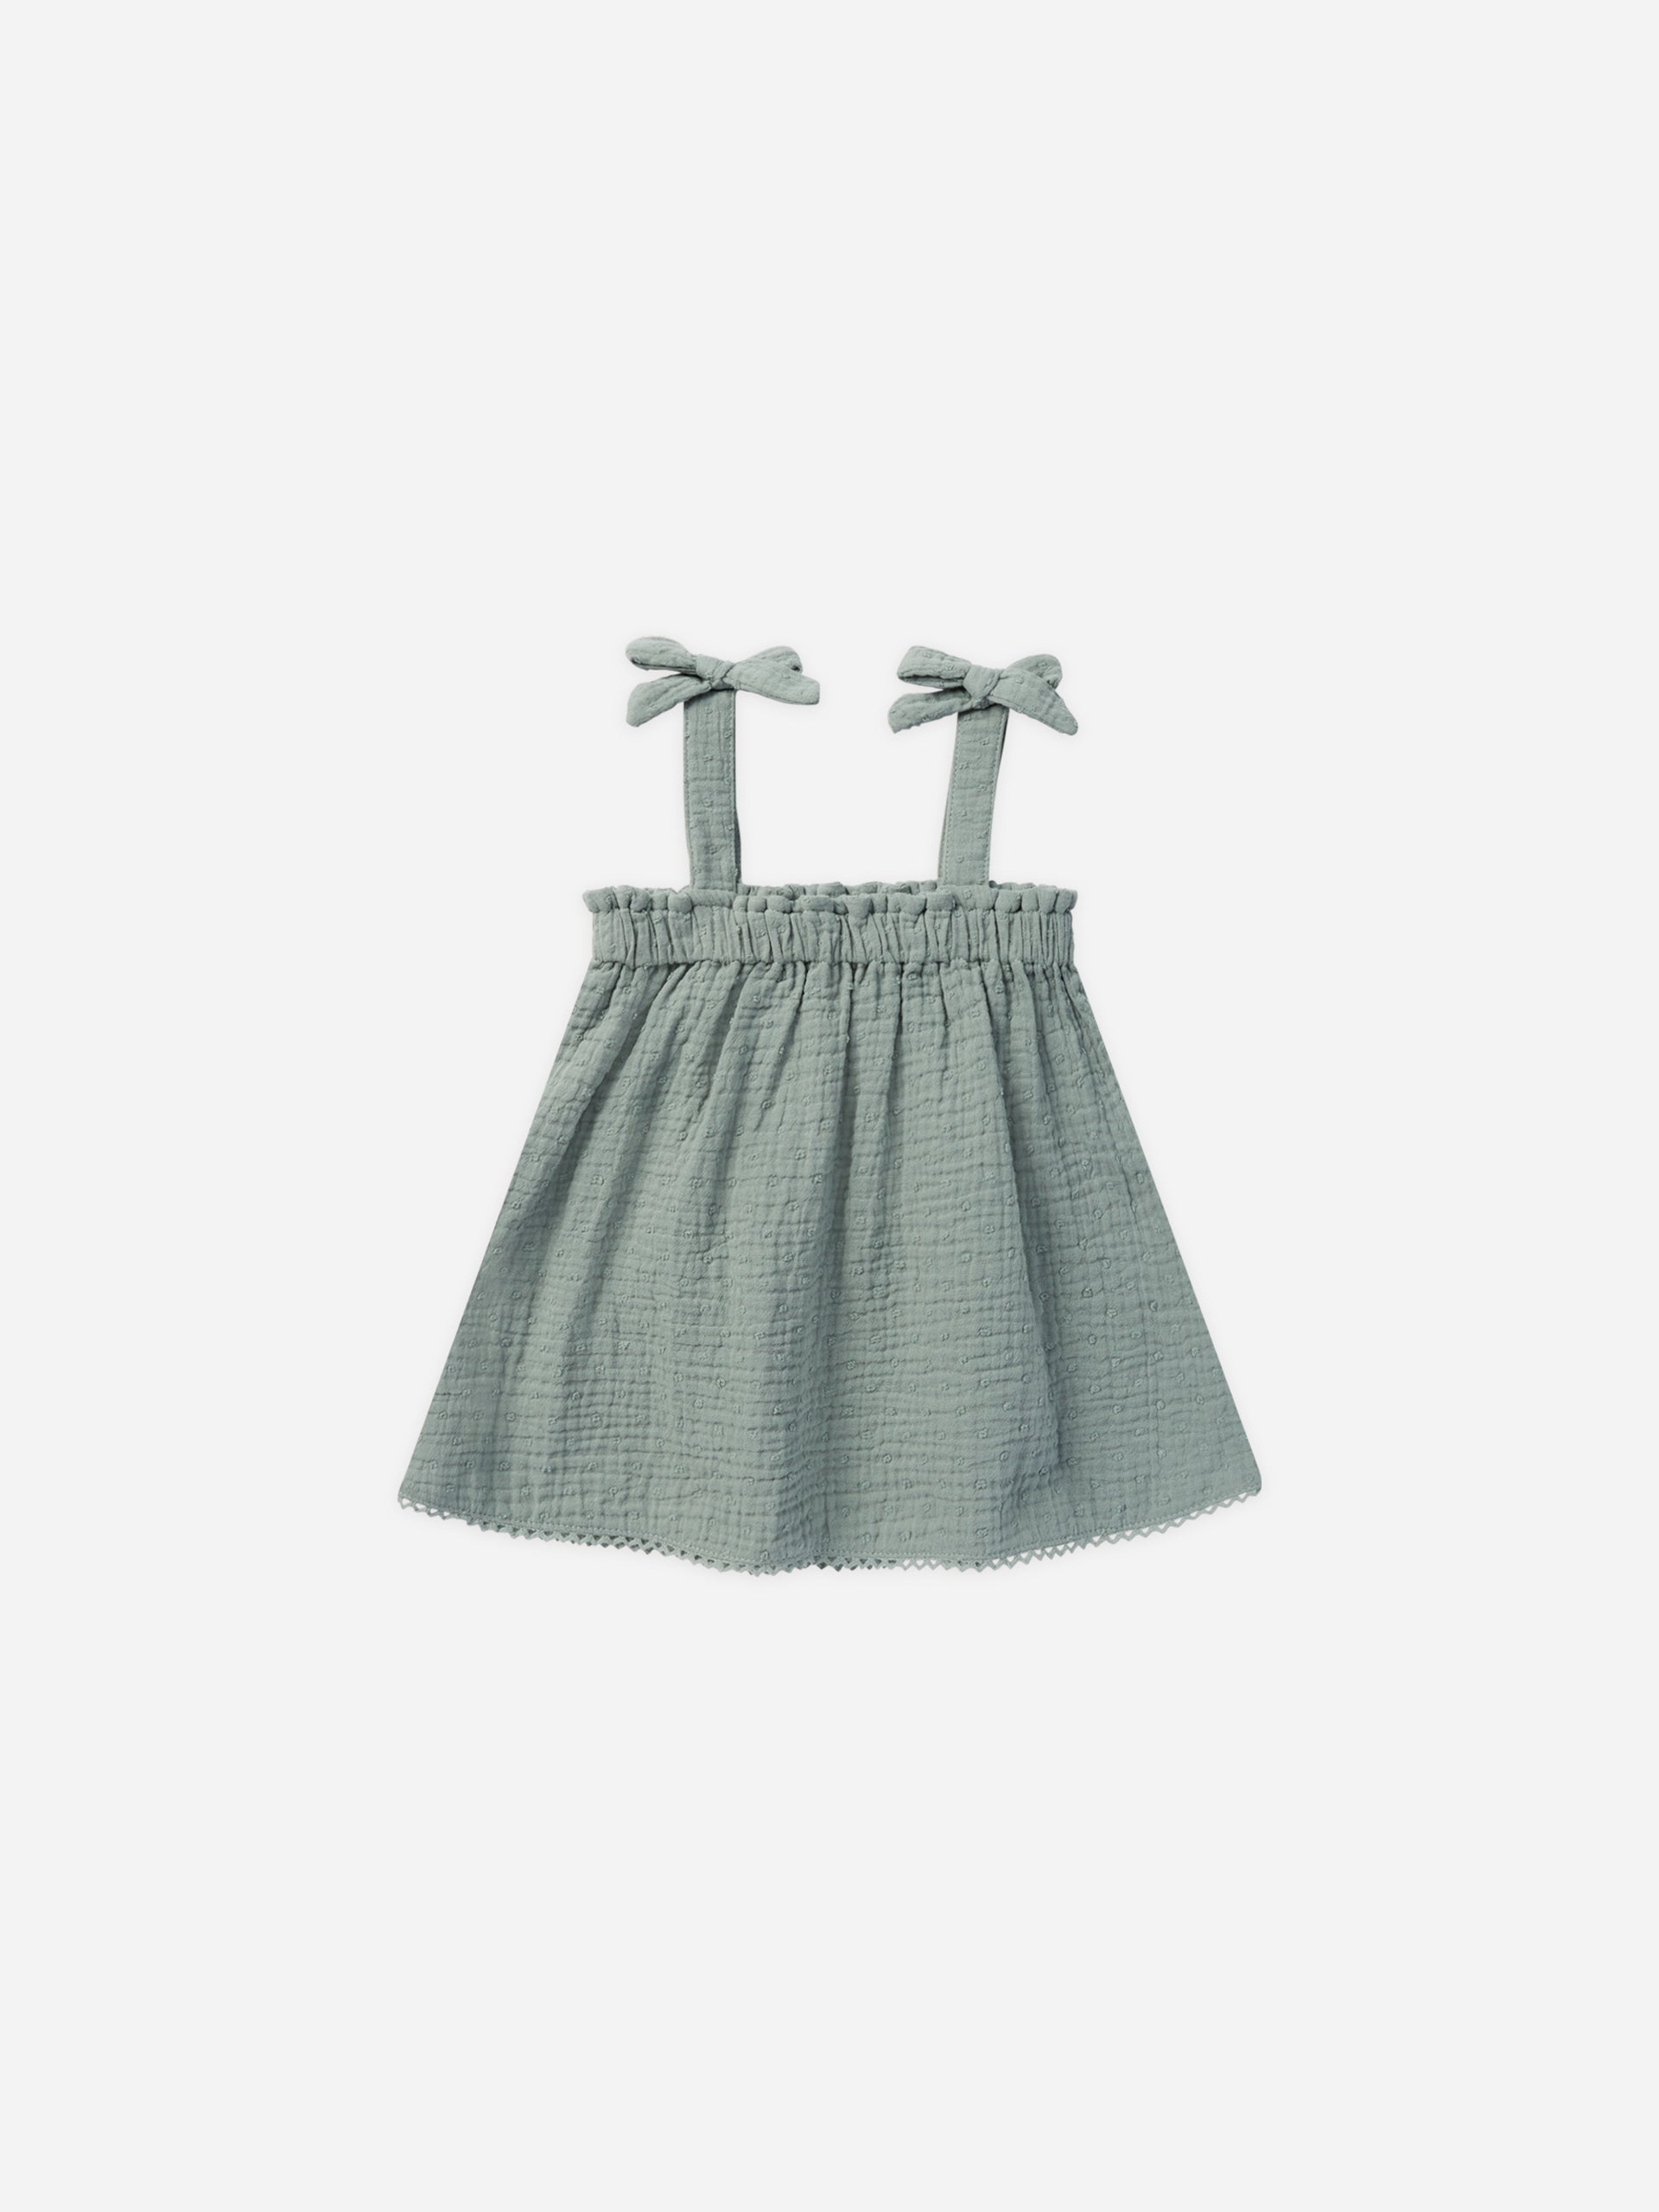 Remi Top || Aqua - Rylee + Cru | Kids Clothes | Trendy Baby Clothes | Modern Infant Outfits |